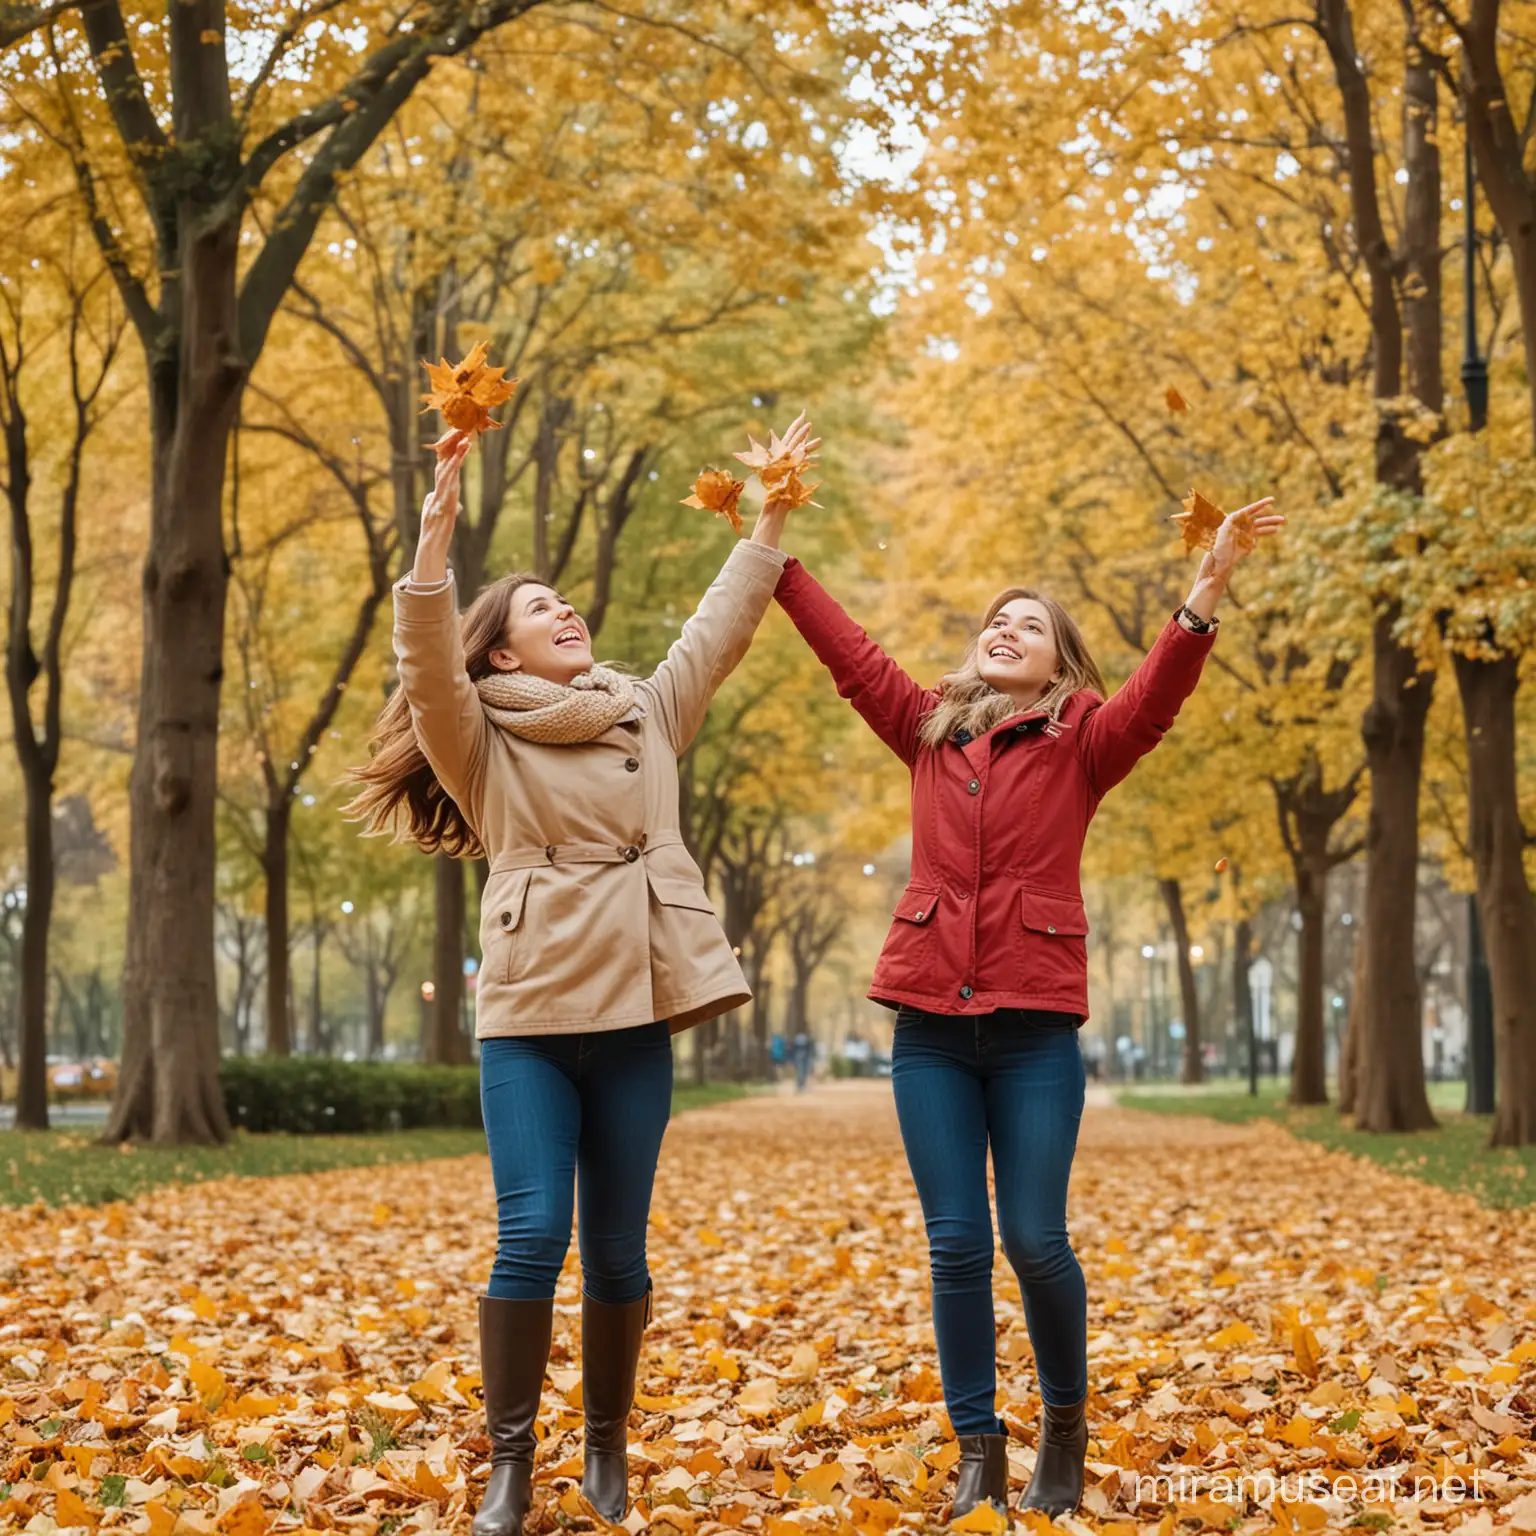 Joyful Mother and Daughter Playing with Autumn Leaves in Park